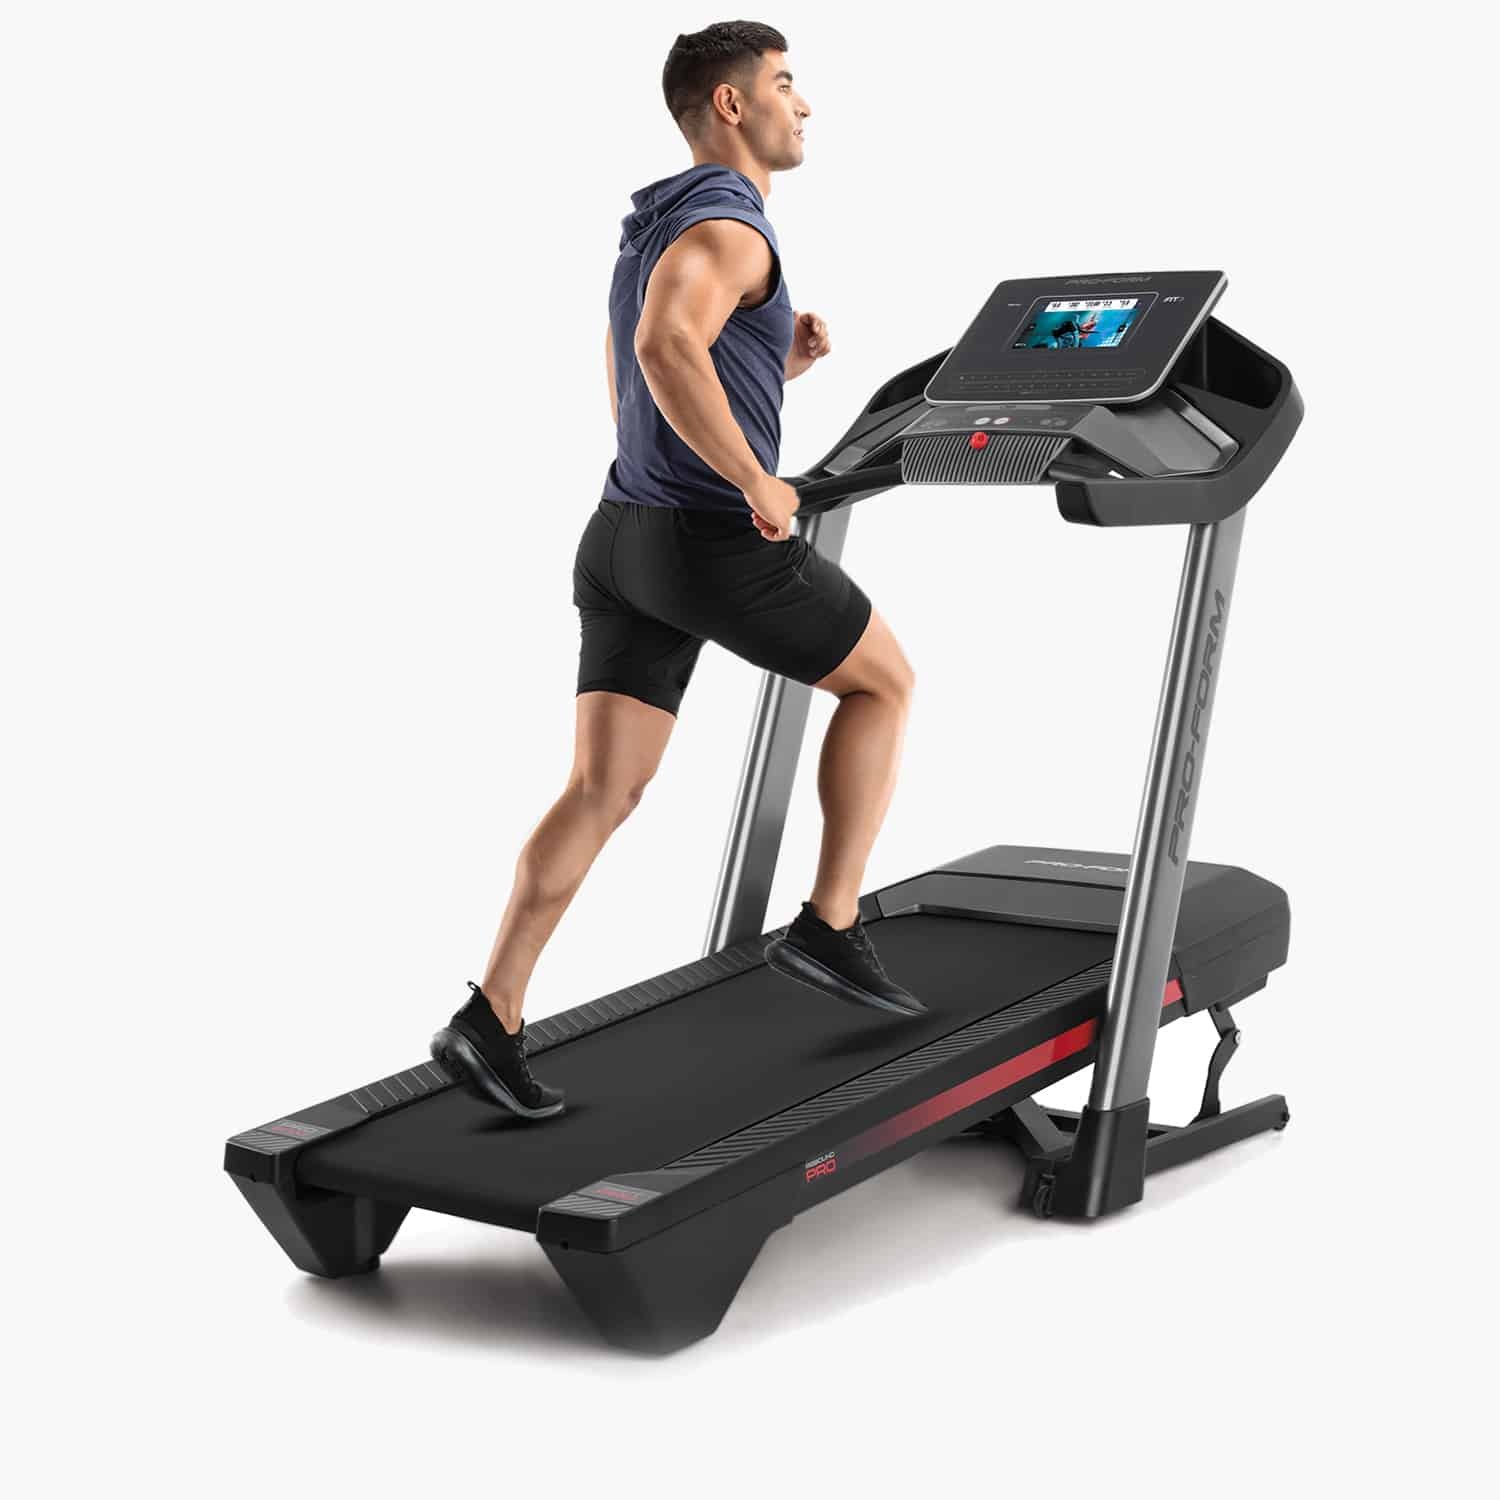 Get A Free Proform Treadmill With 3